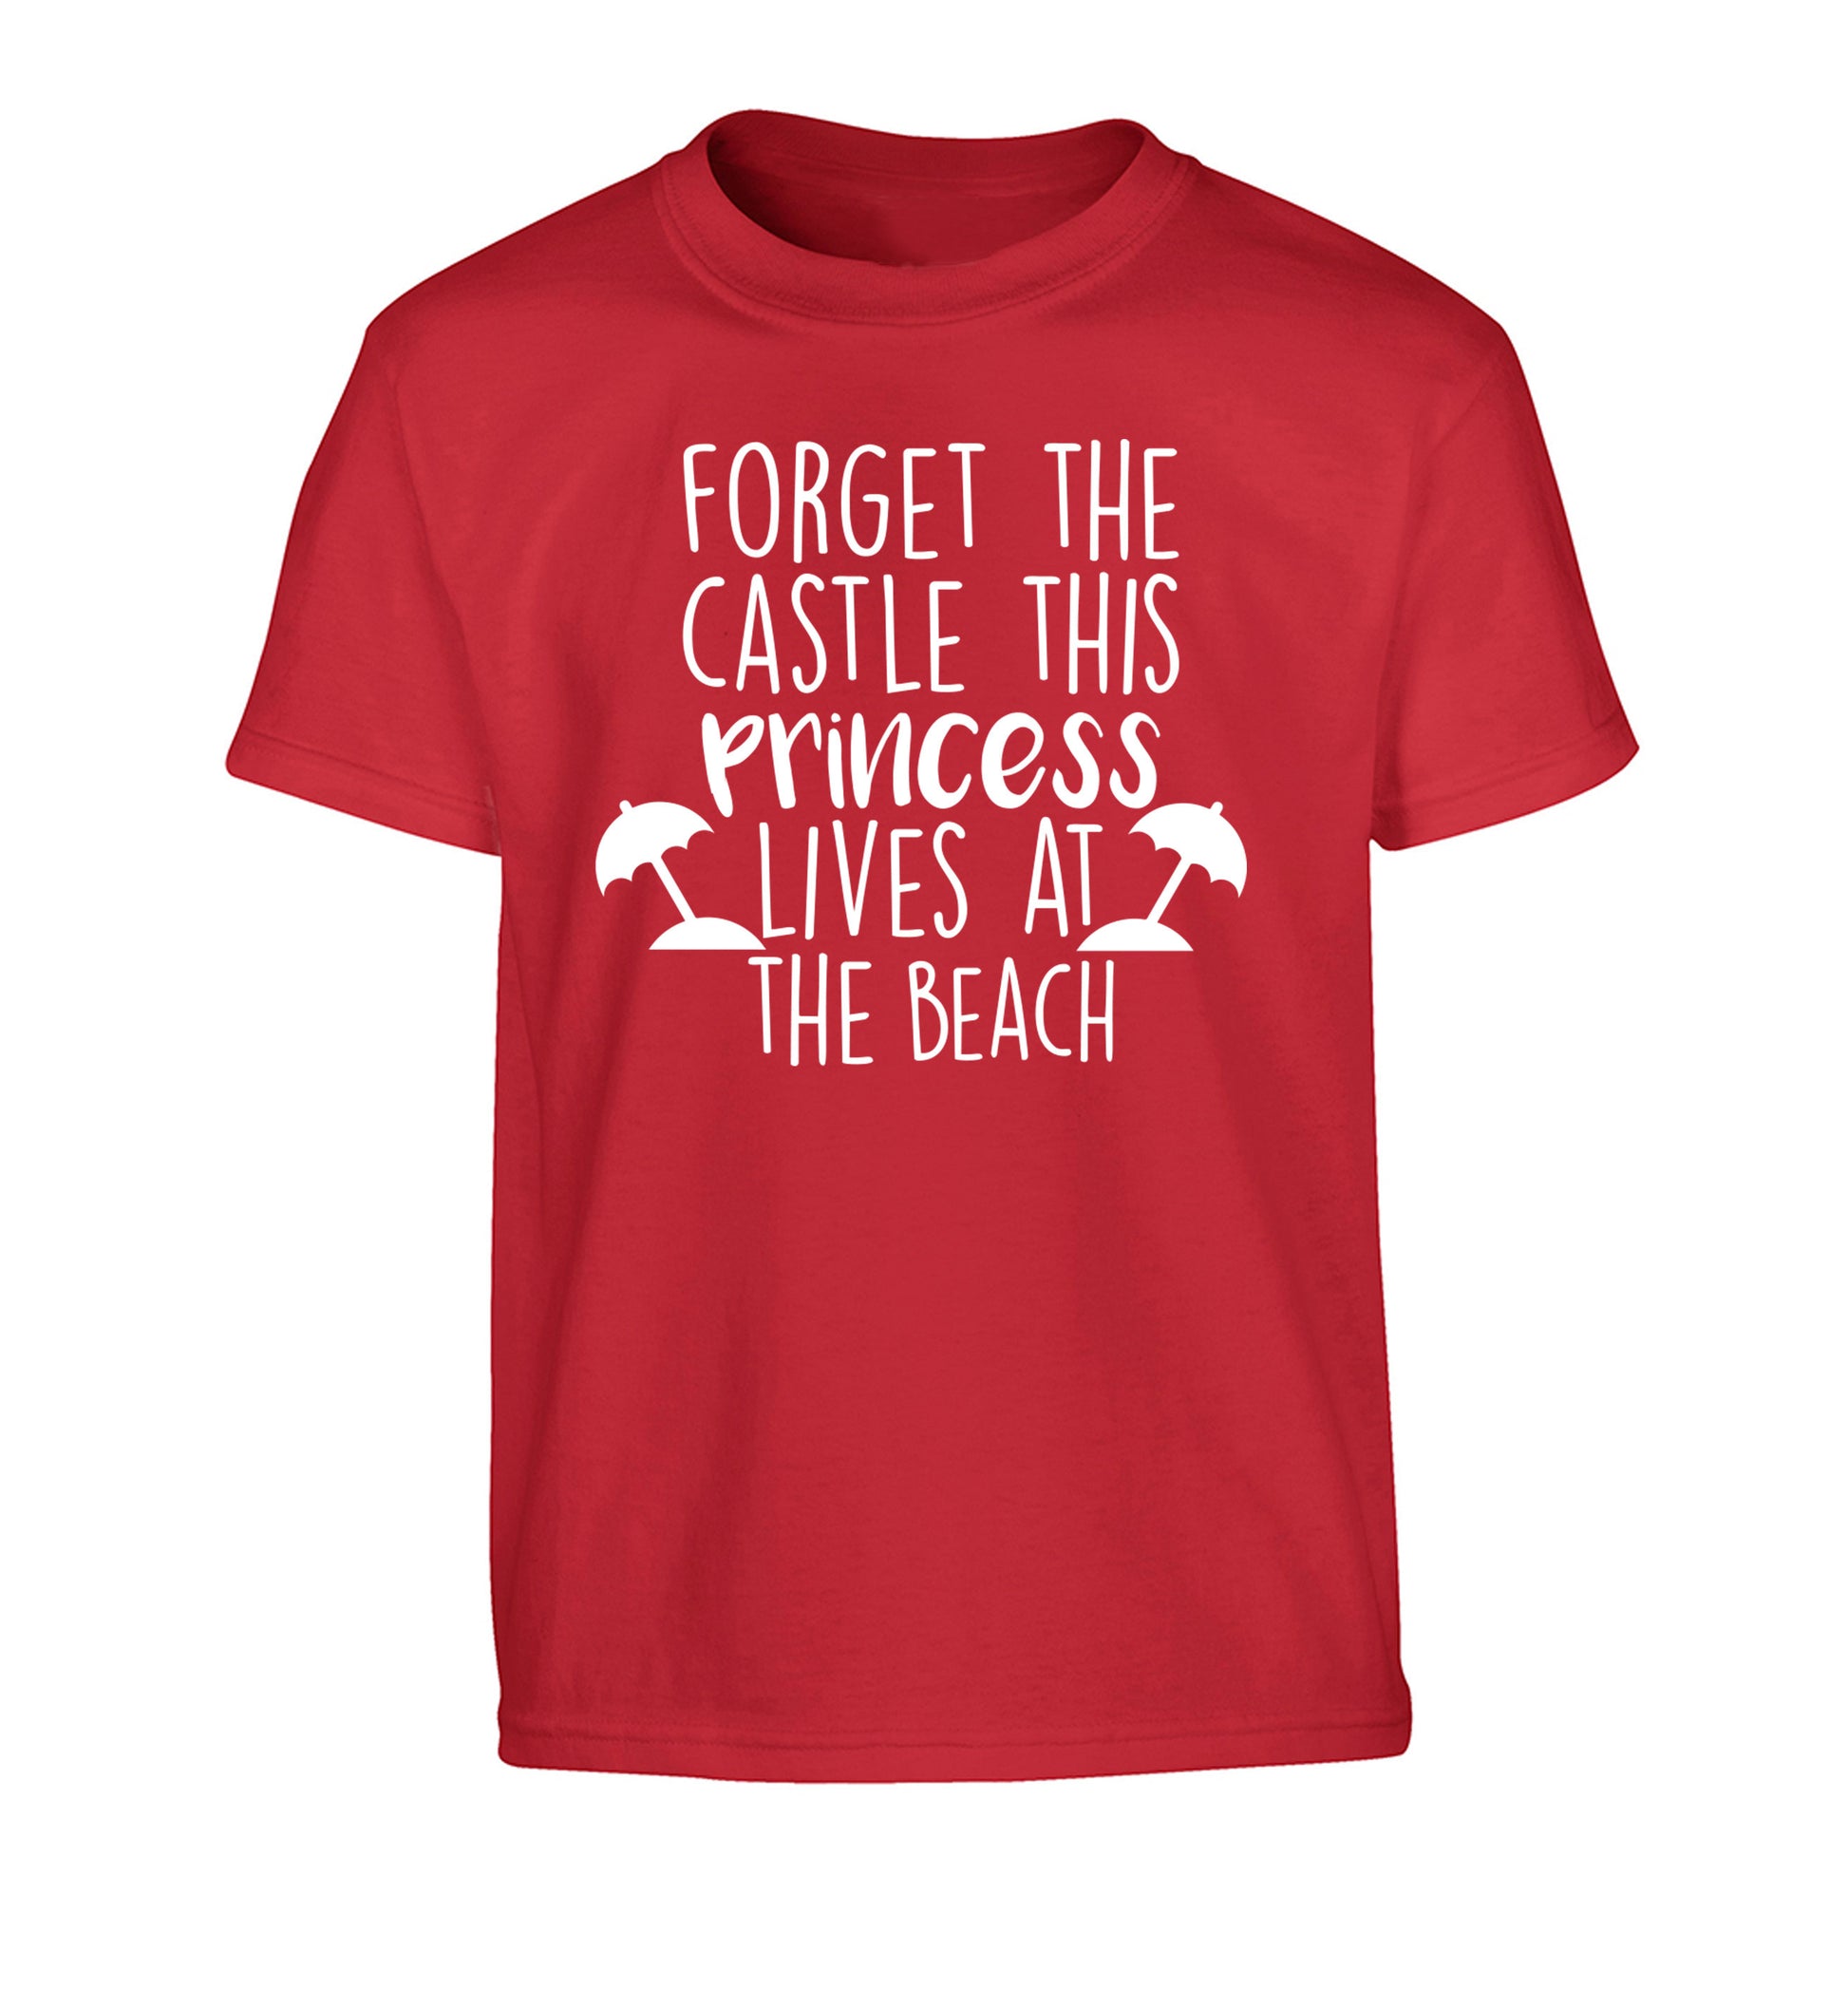 Forget the castle this princess lives at the beach Children's red Tshirt 12-14 Years